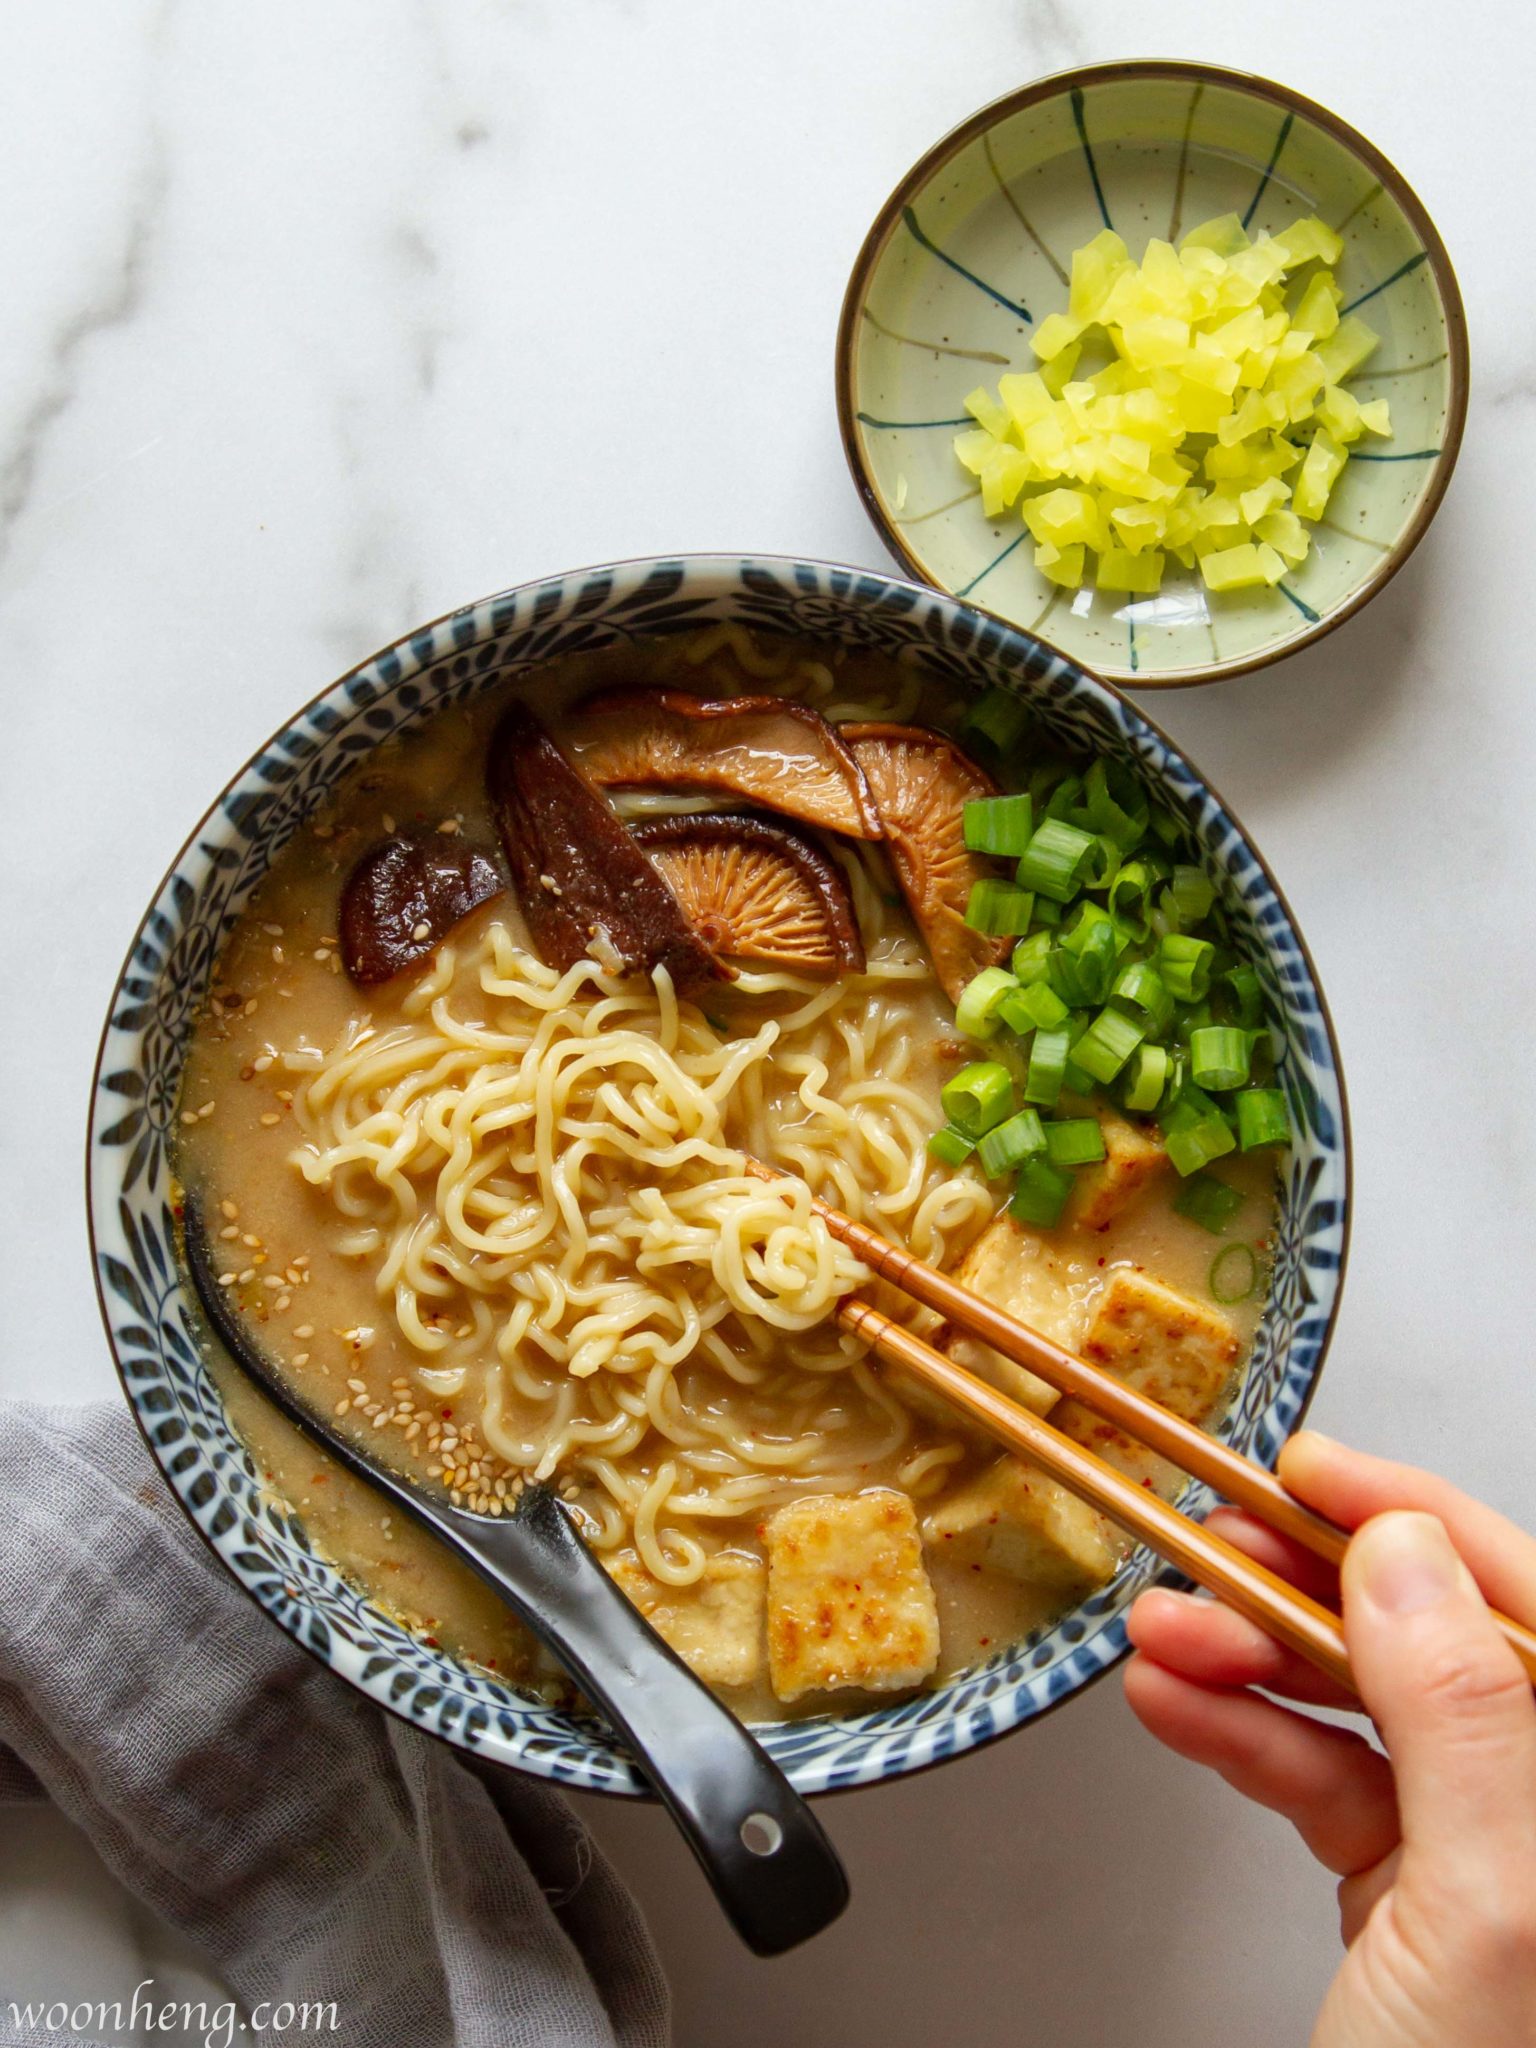 How to Make a Delicious Vegan Miso Ramen - WoonHeng